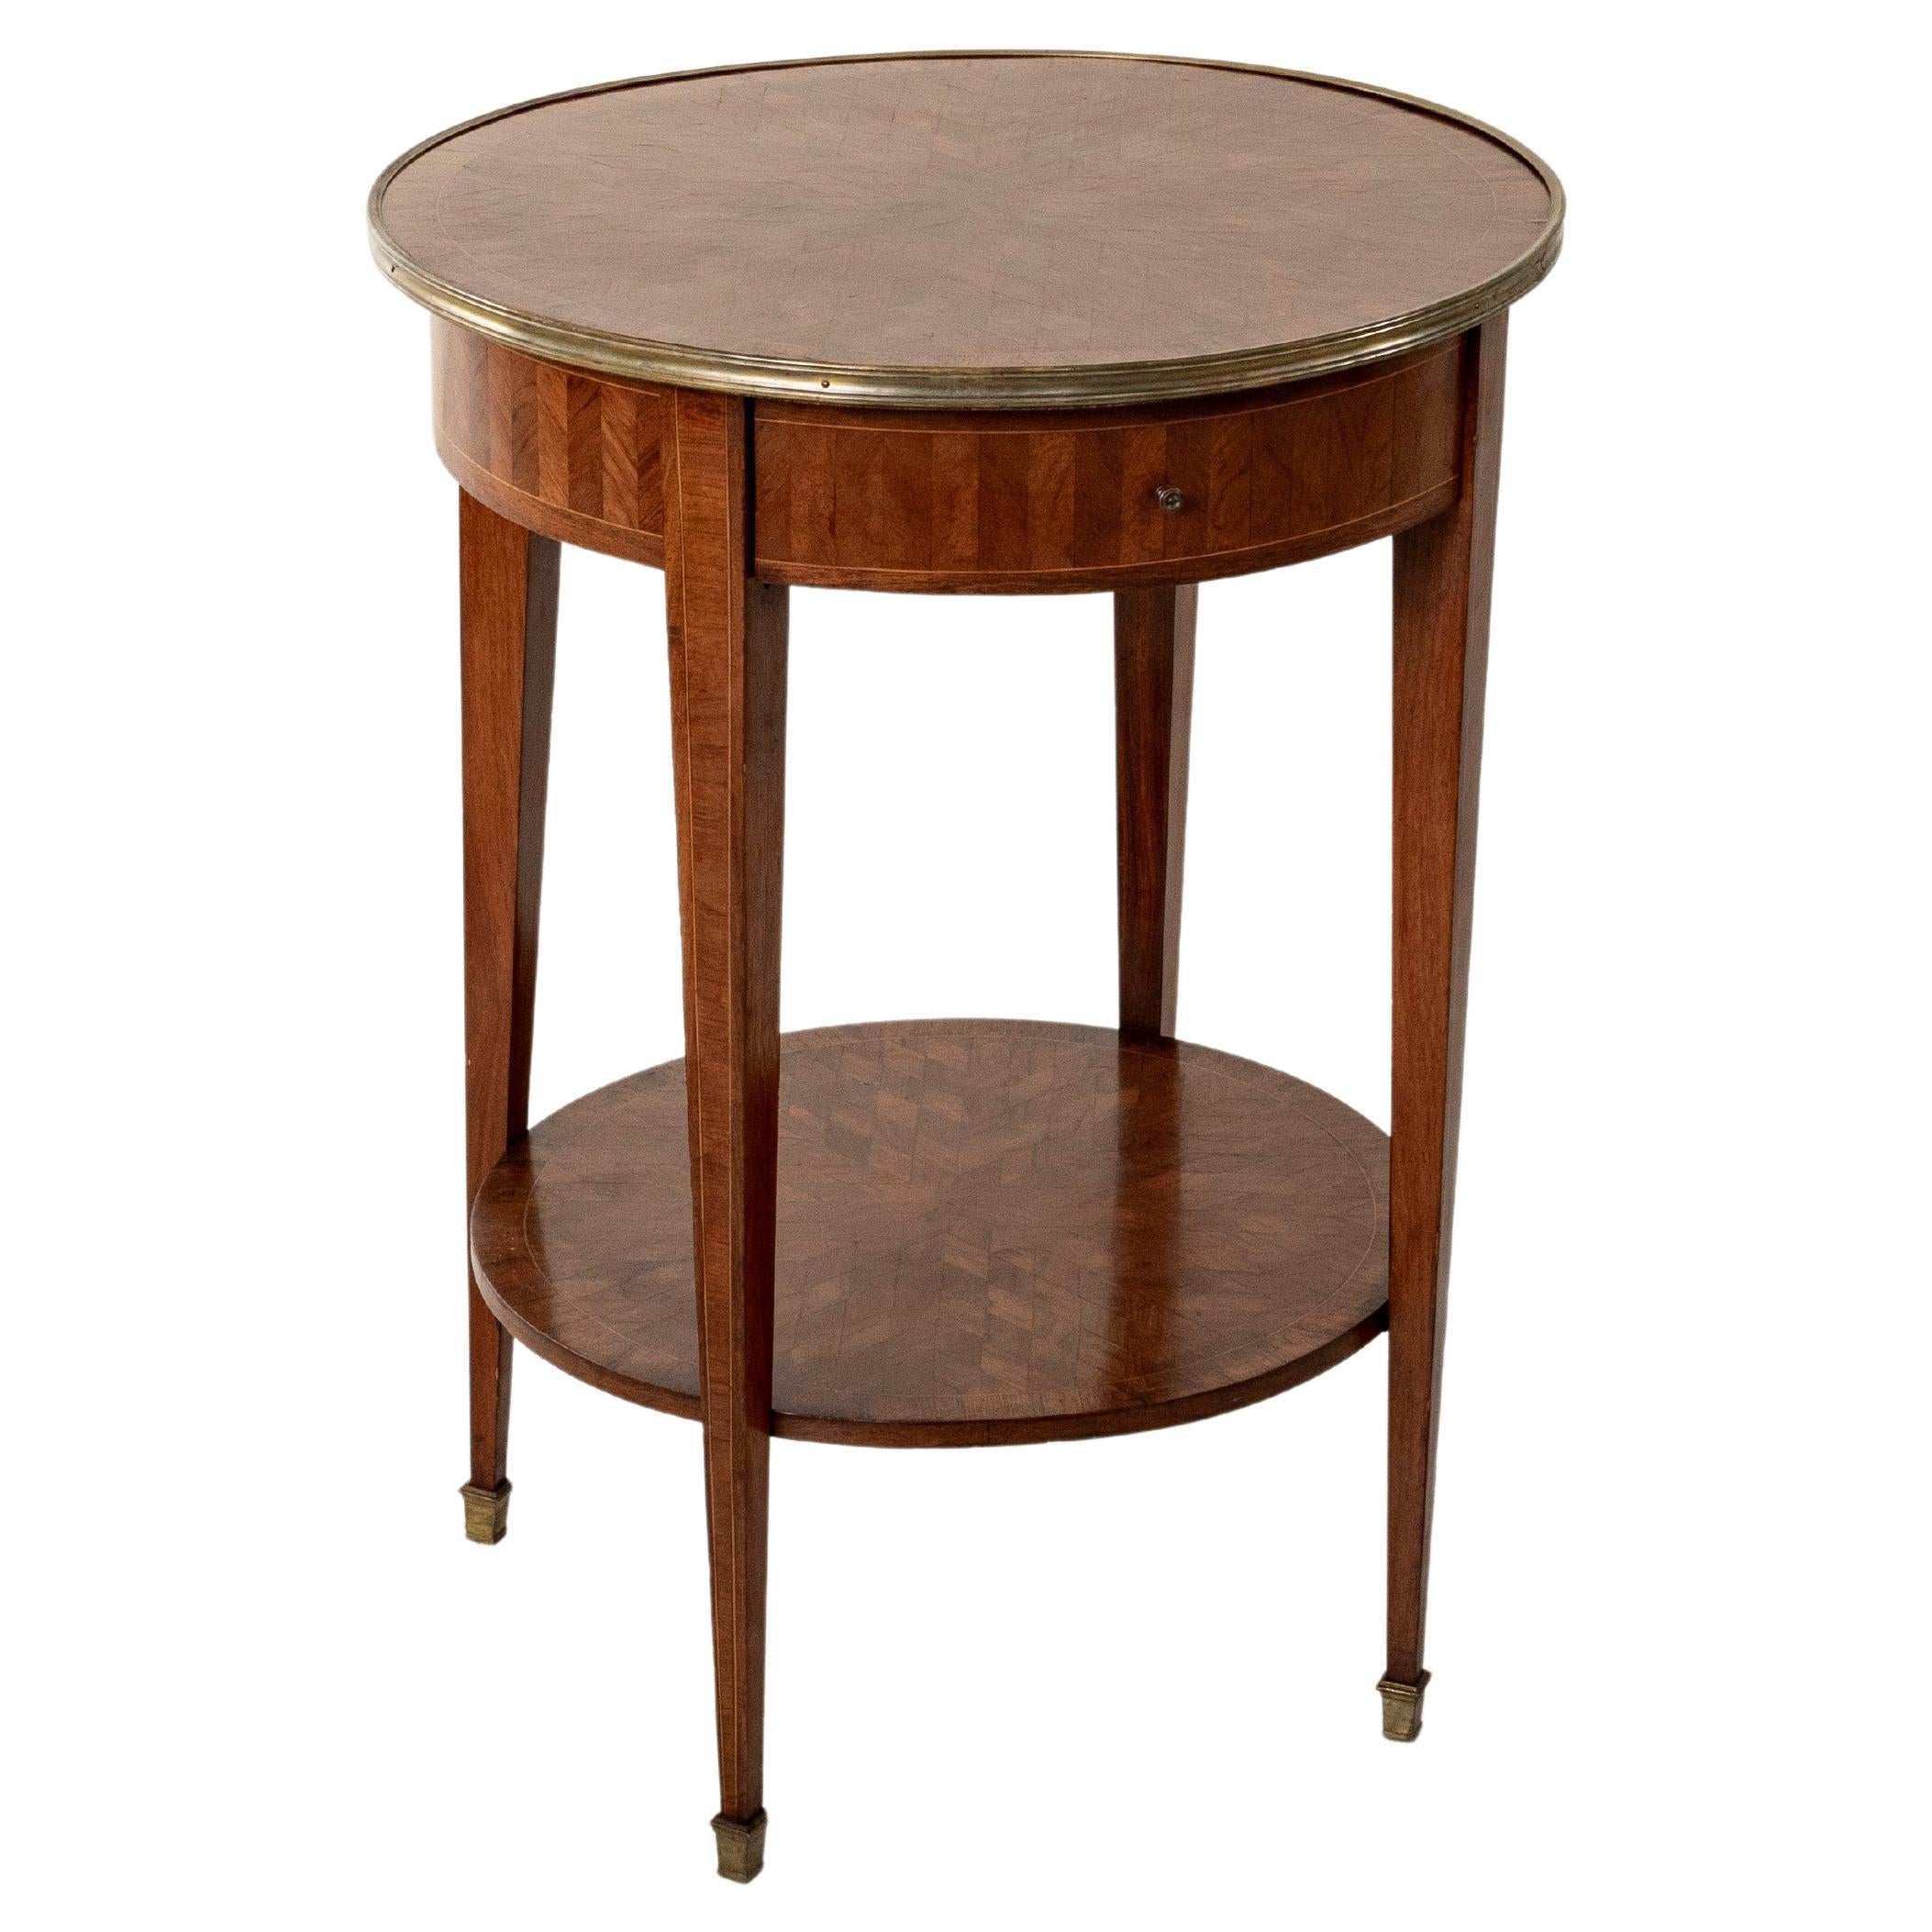 Late 19th Century French Louis XVI Style Rosewood Marquetry Gueridon Side Table For Sale